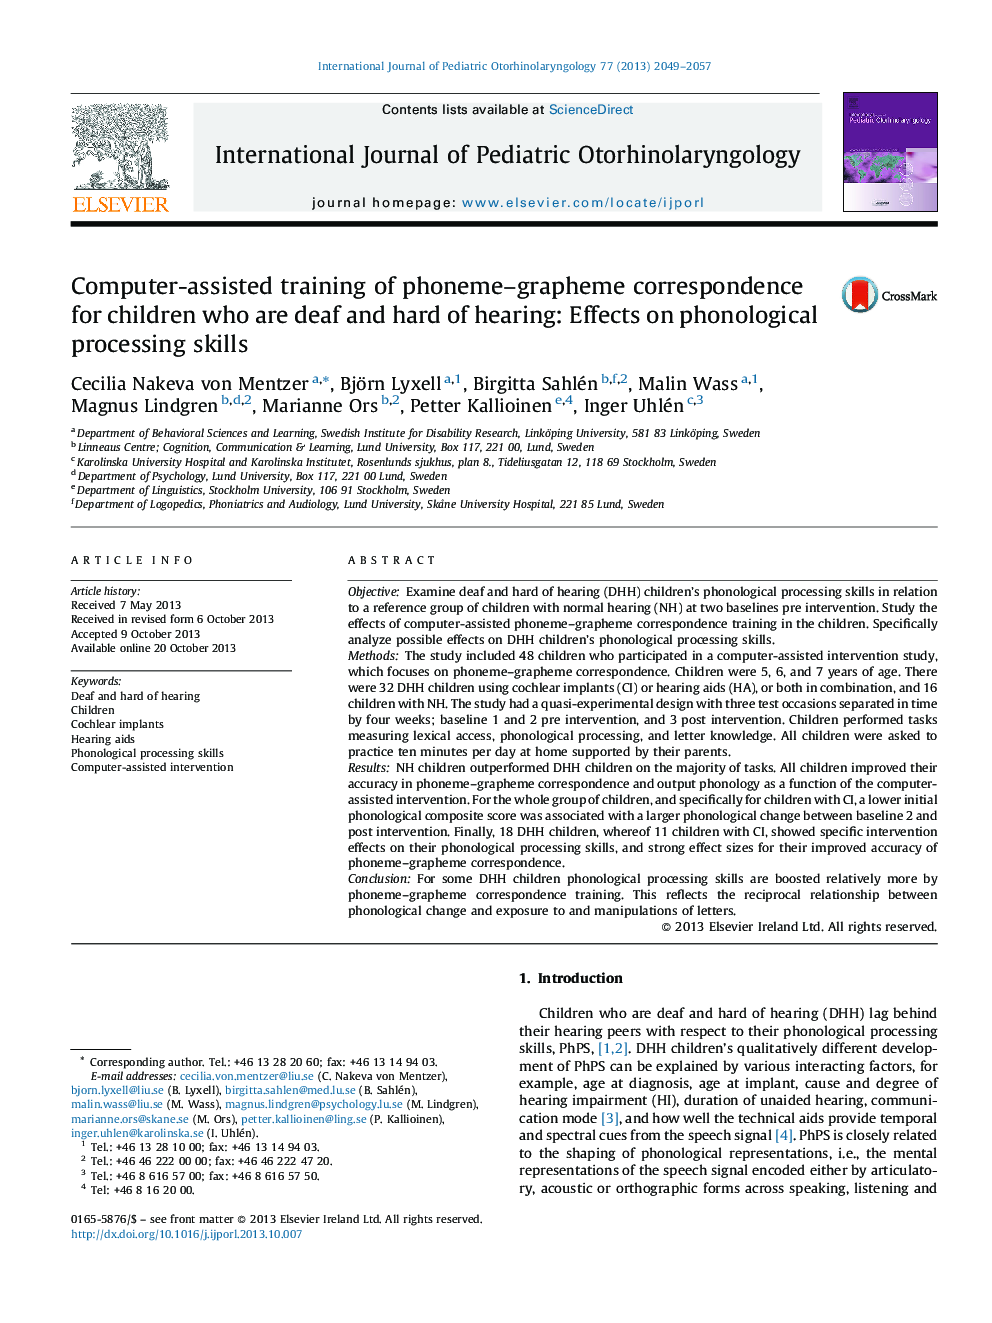 Computer-assisted training of phoneme-grapheme correspondence for children who are deaf and hard of hearing: Effects on phonological processing skills